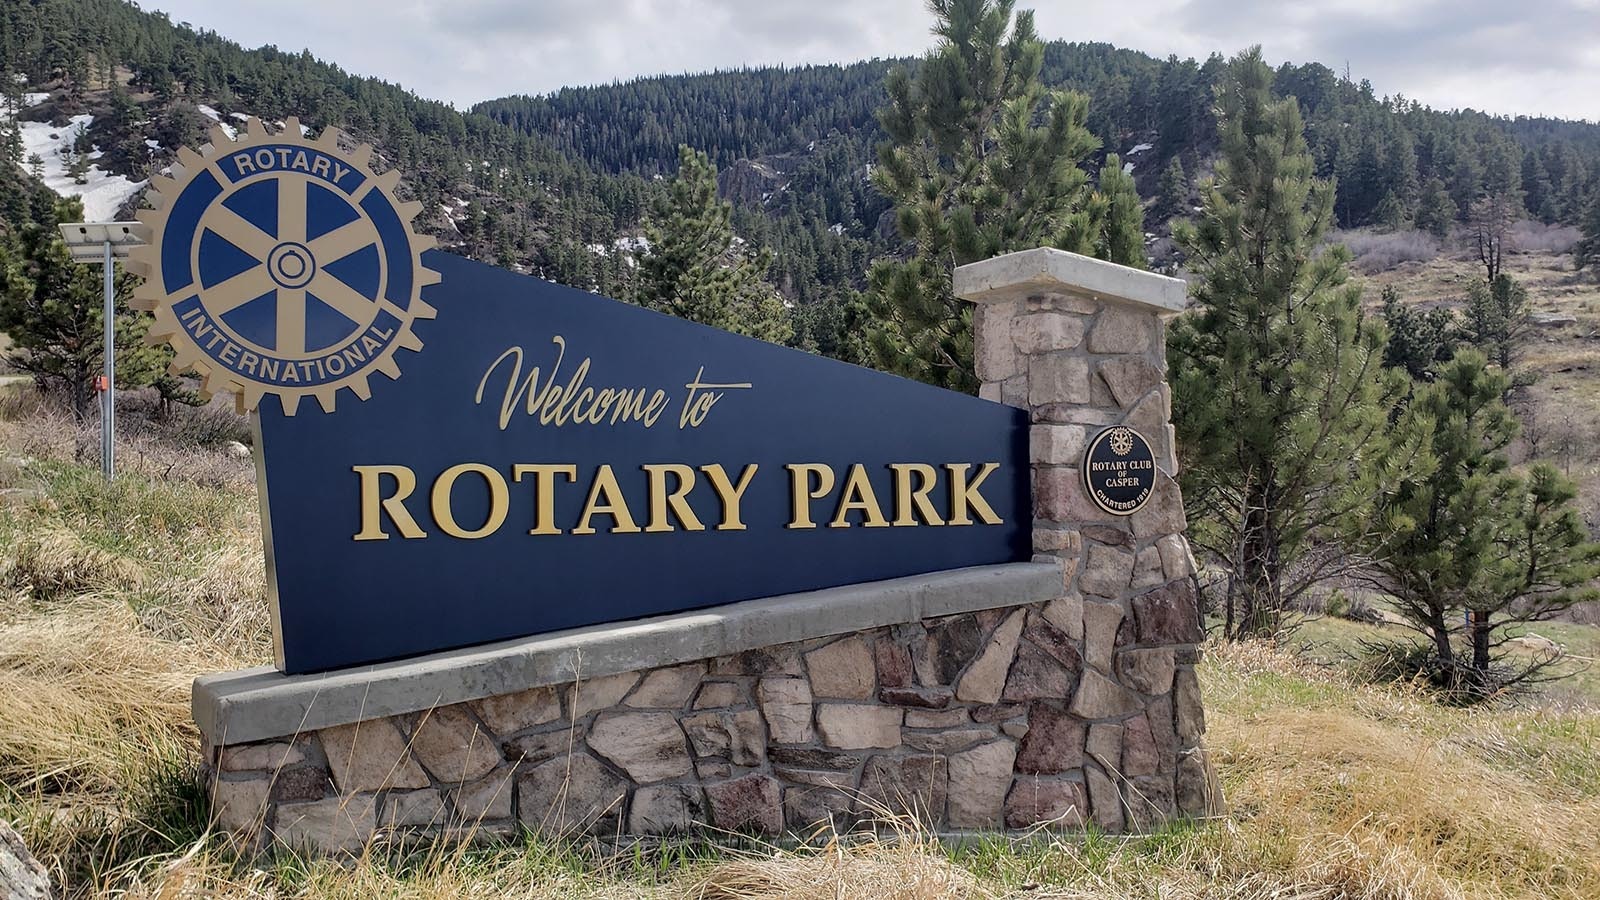 Rotary Park is maintained by the Rotary Club International.